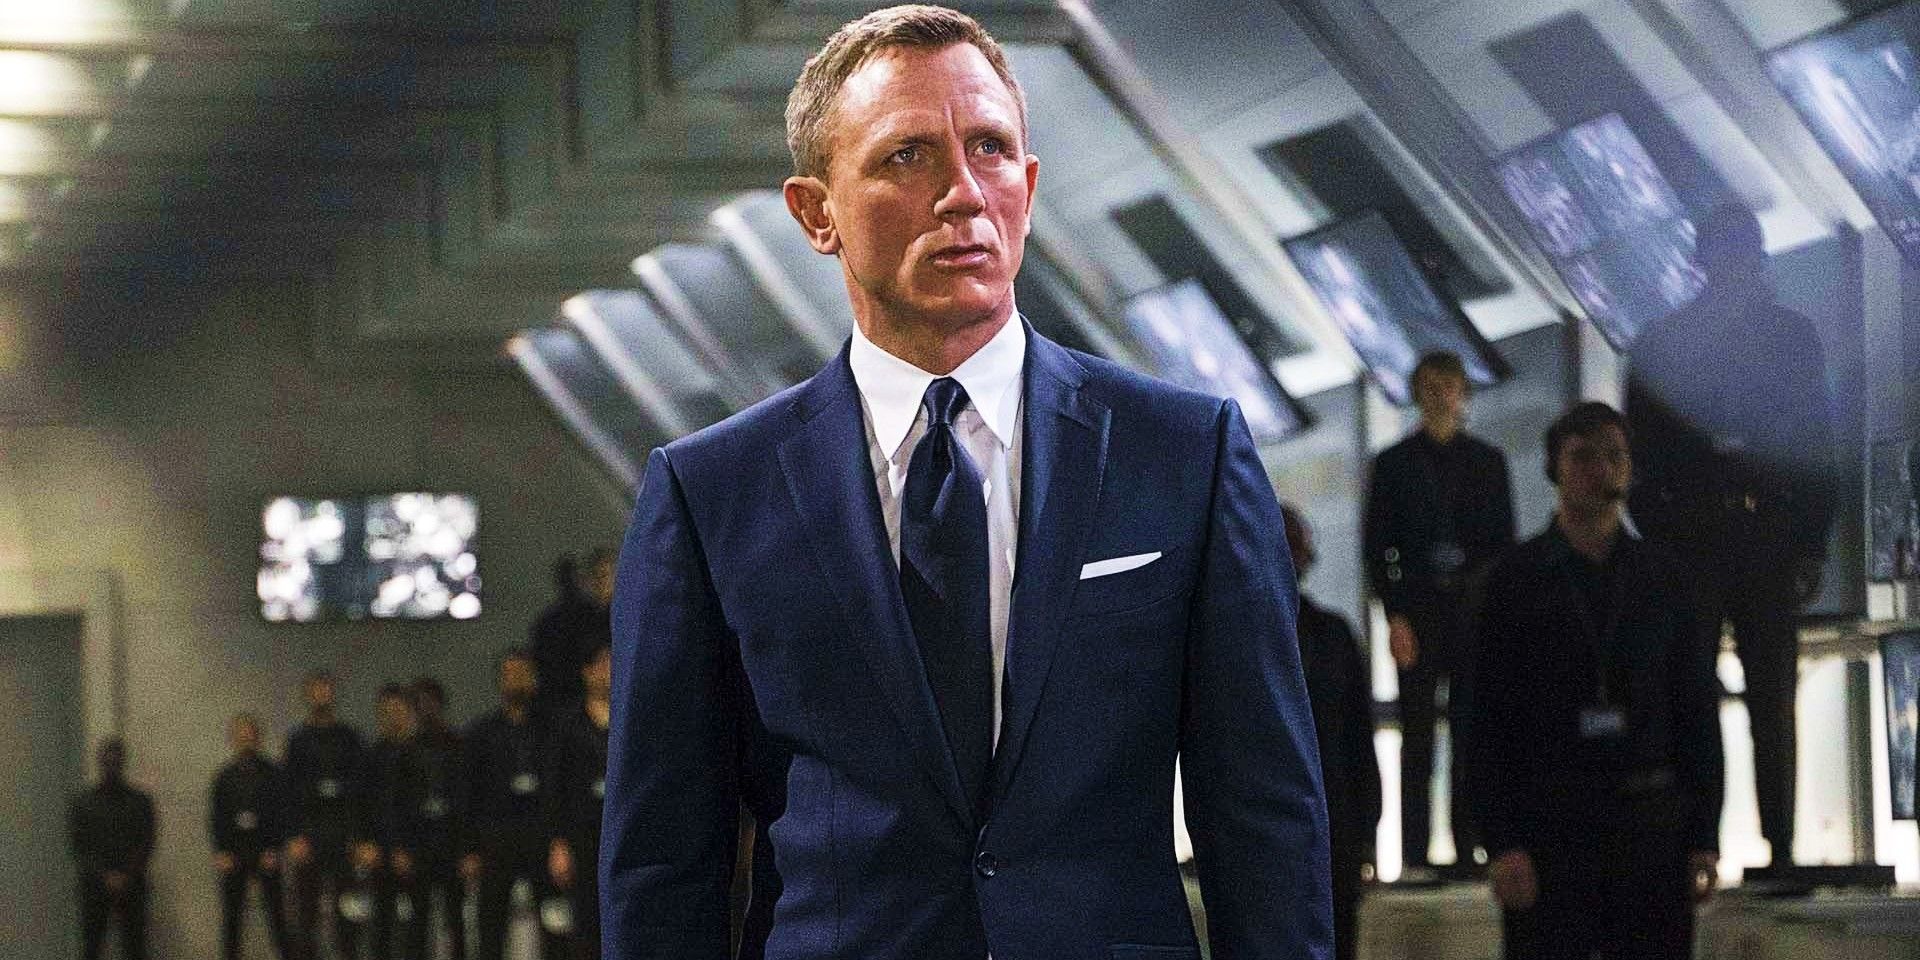 James Bond Producers Open To Casting a Non-Binary 007